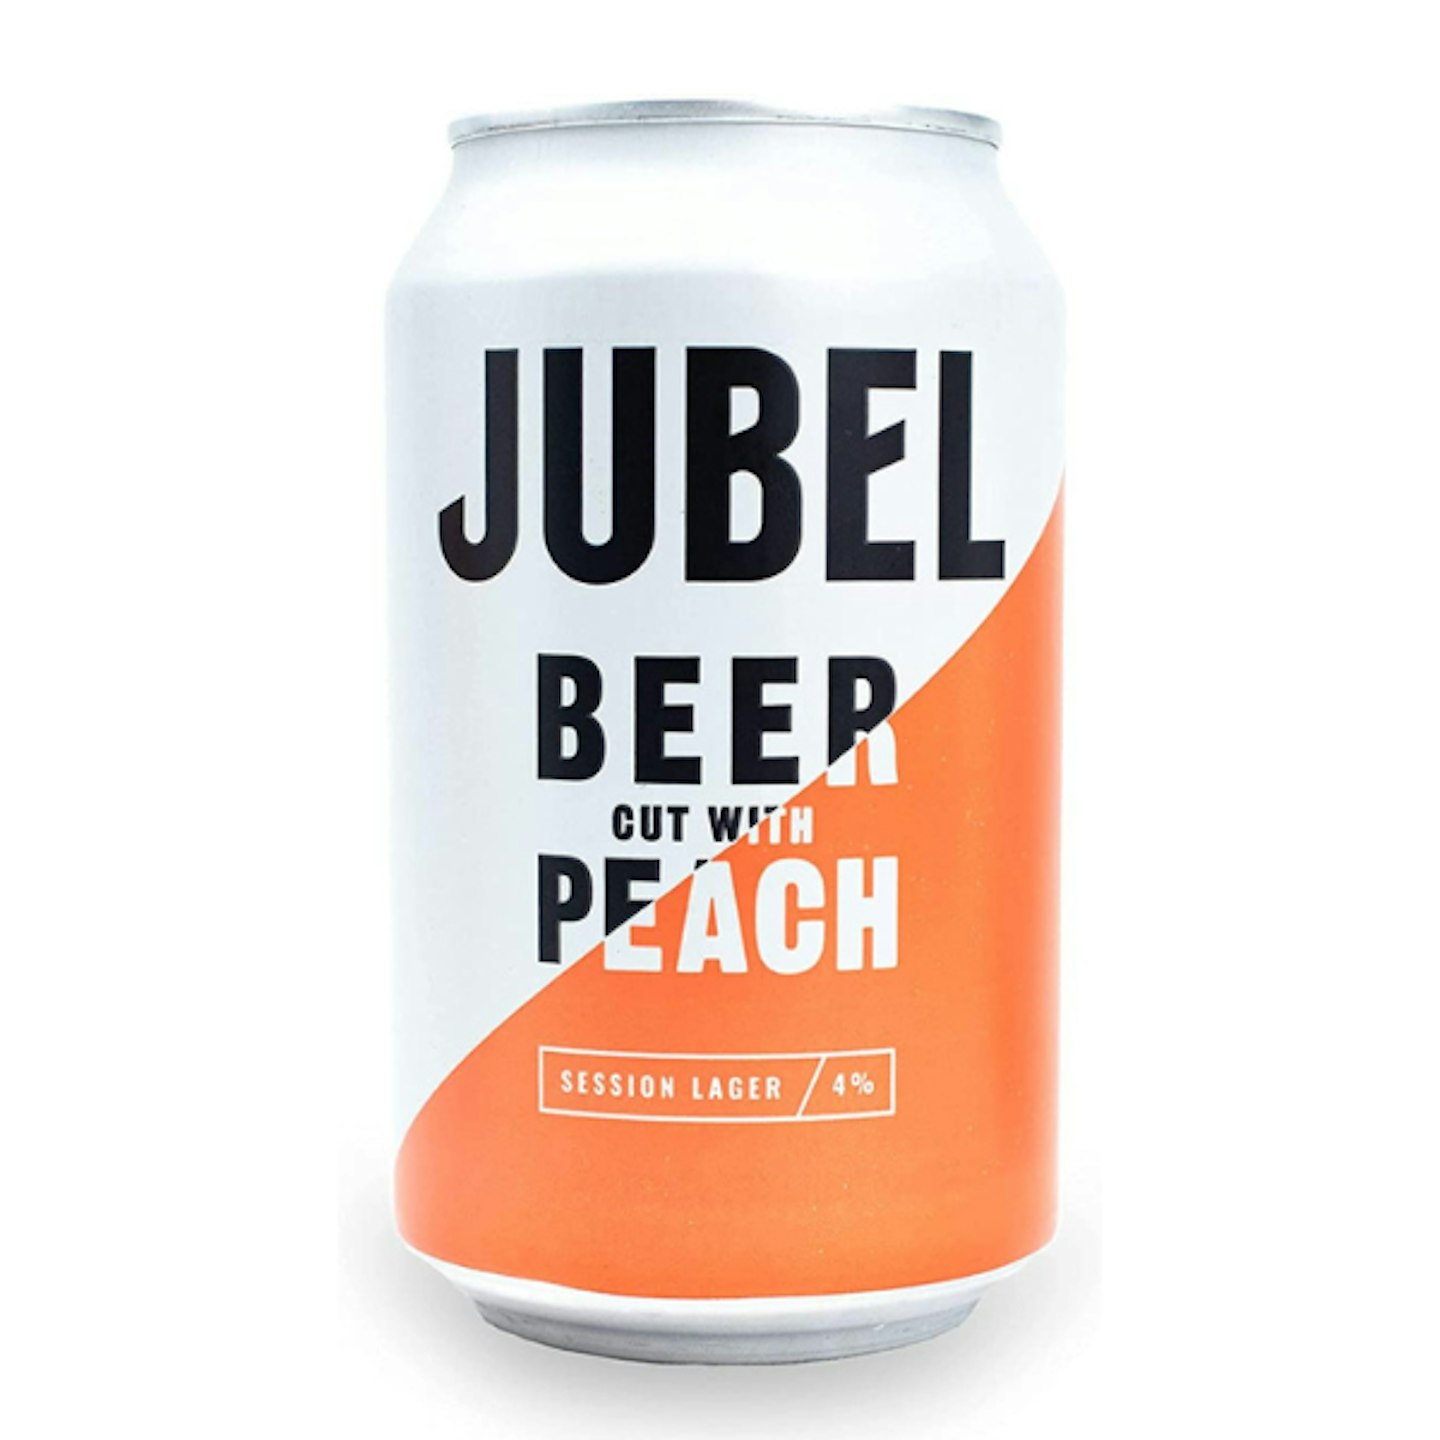 Jubel beer with peach